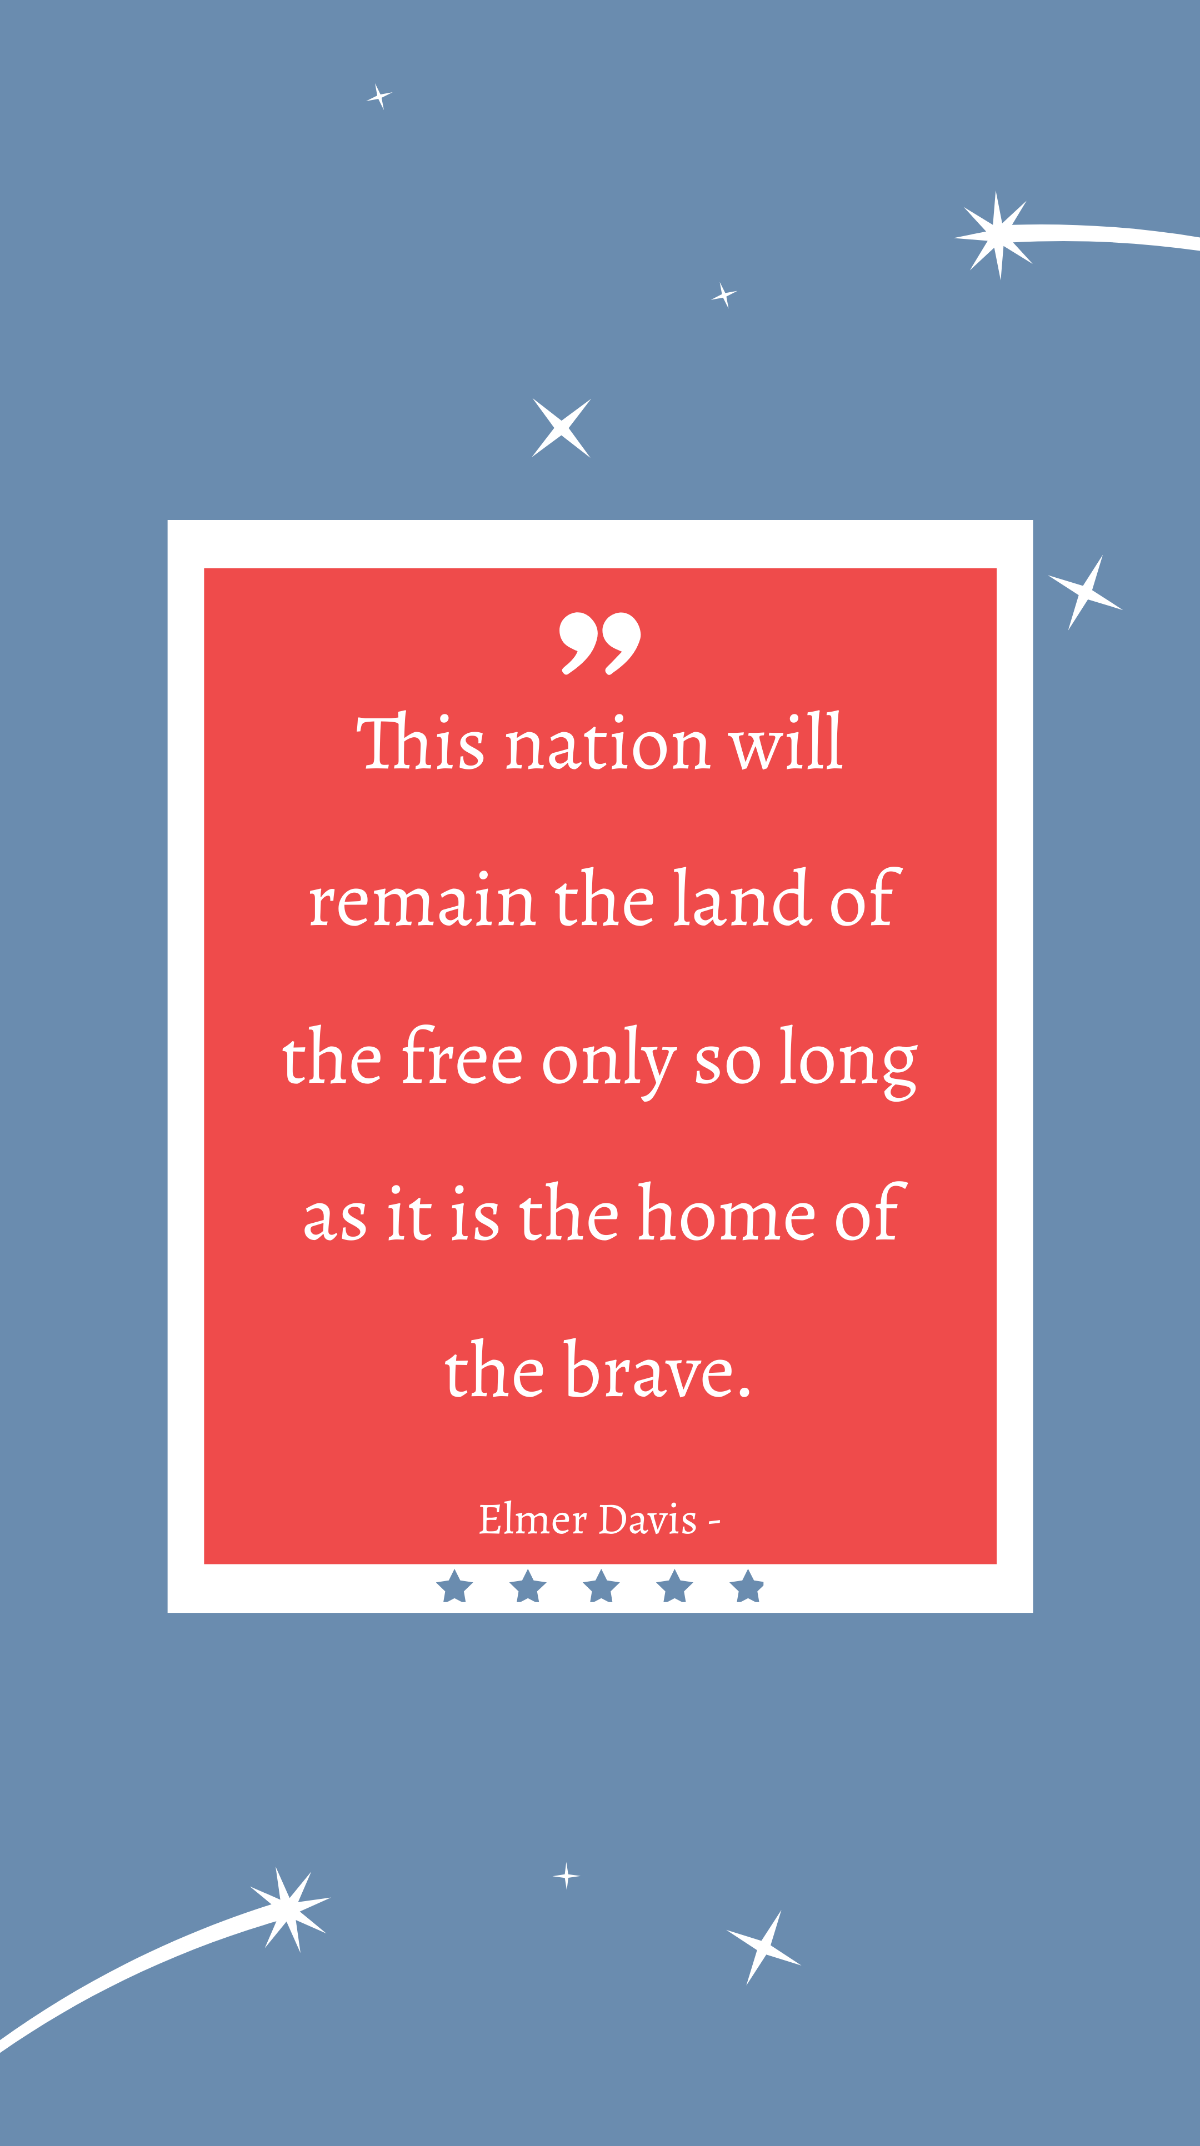 Elmer Davis - This nation will remain the land of the only so long as it is the home of the brave. Template